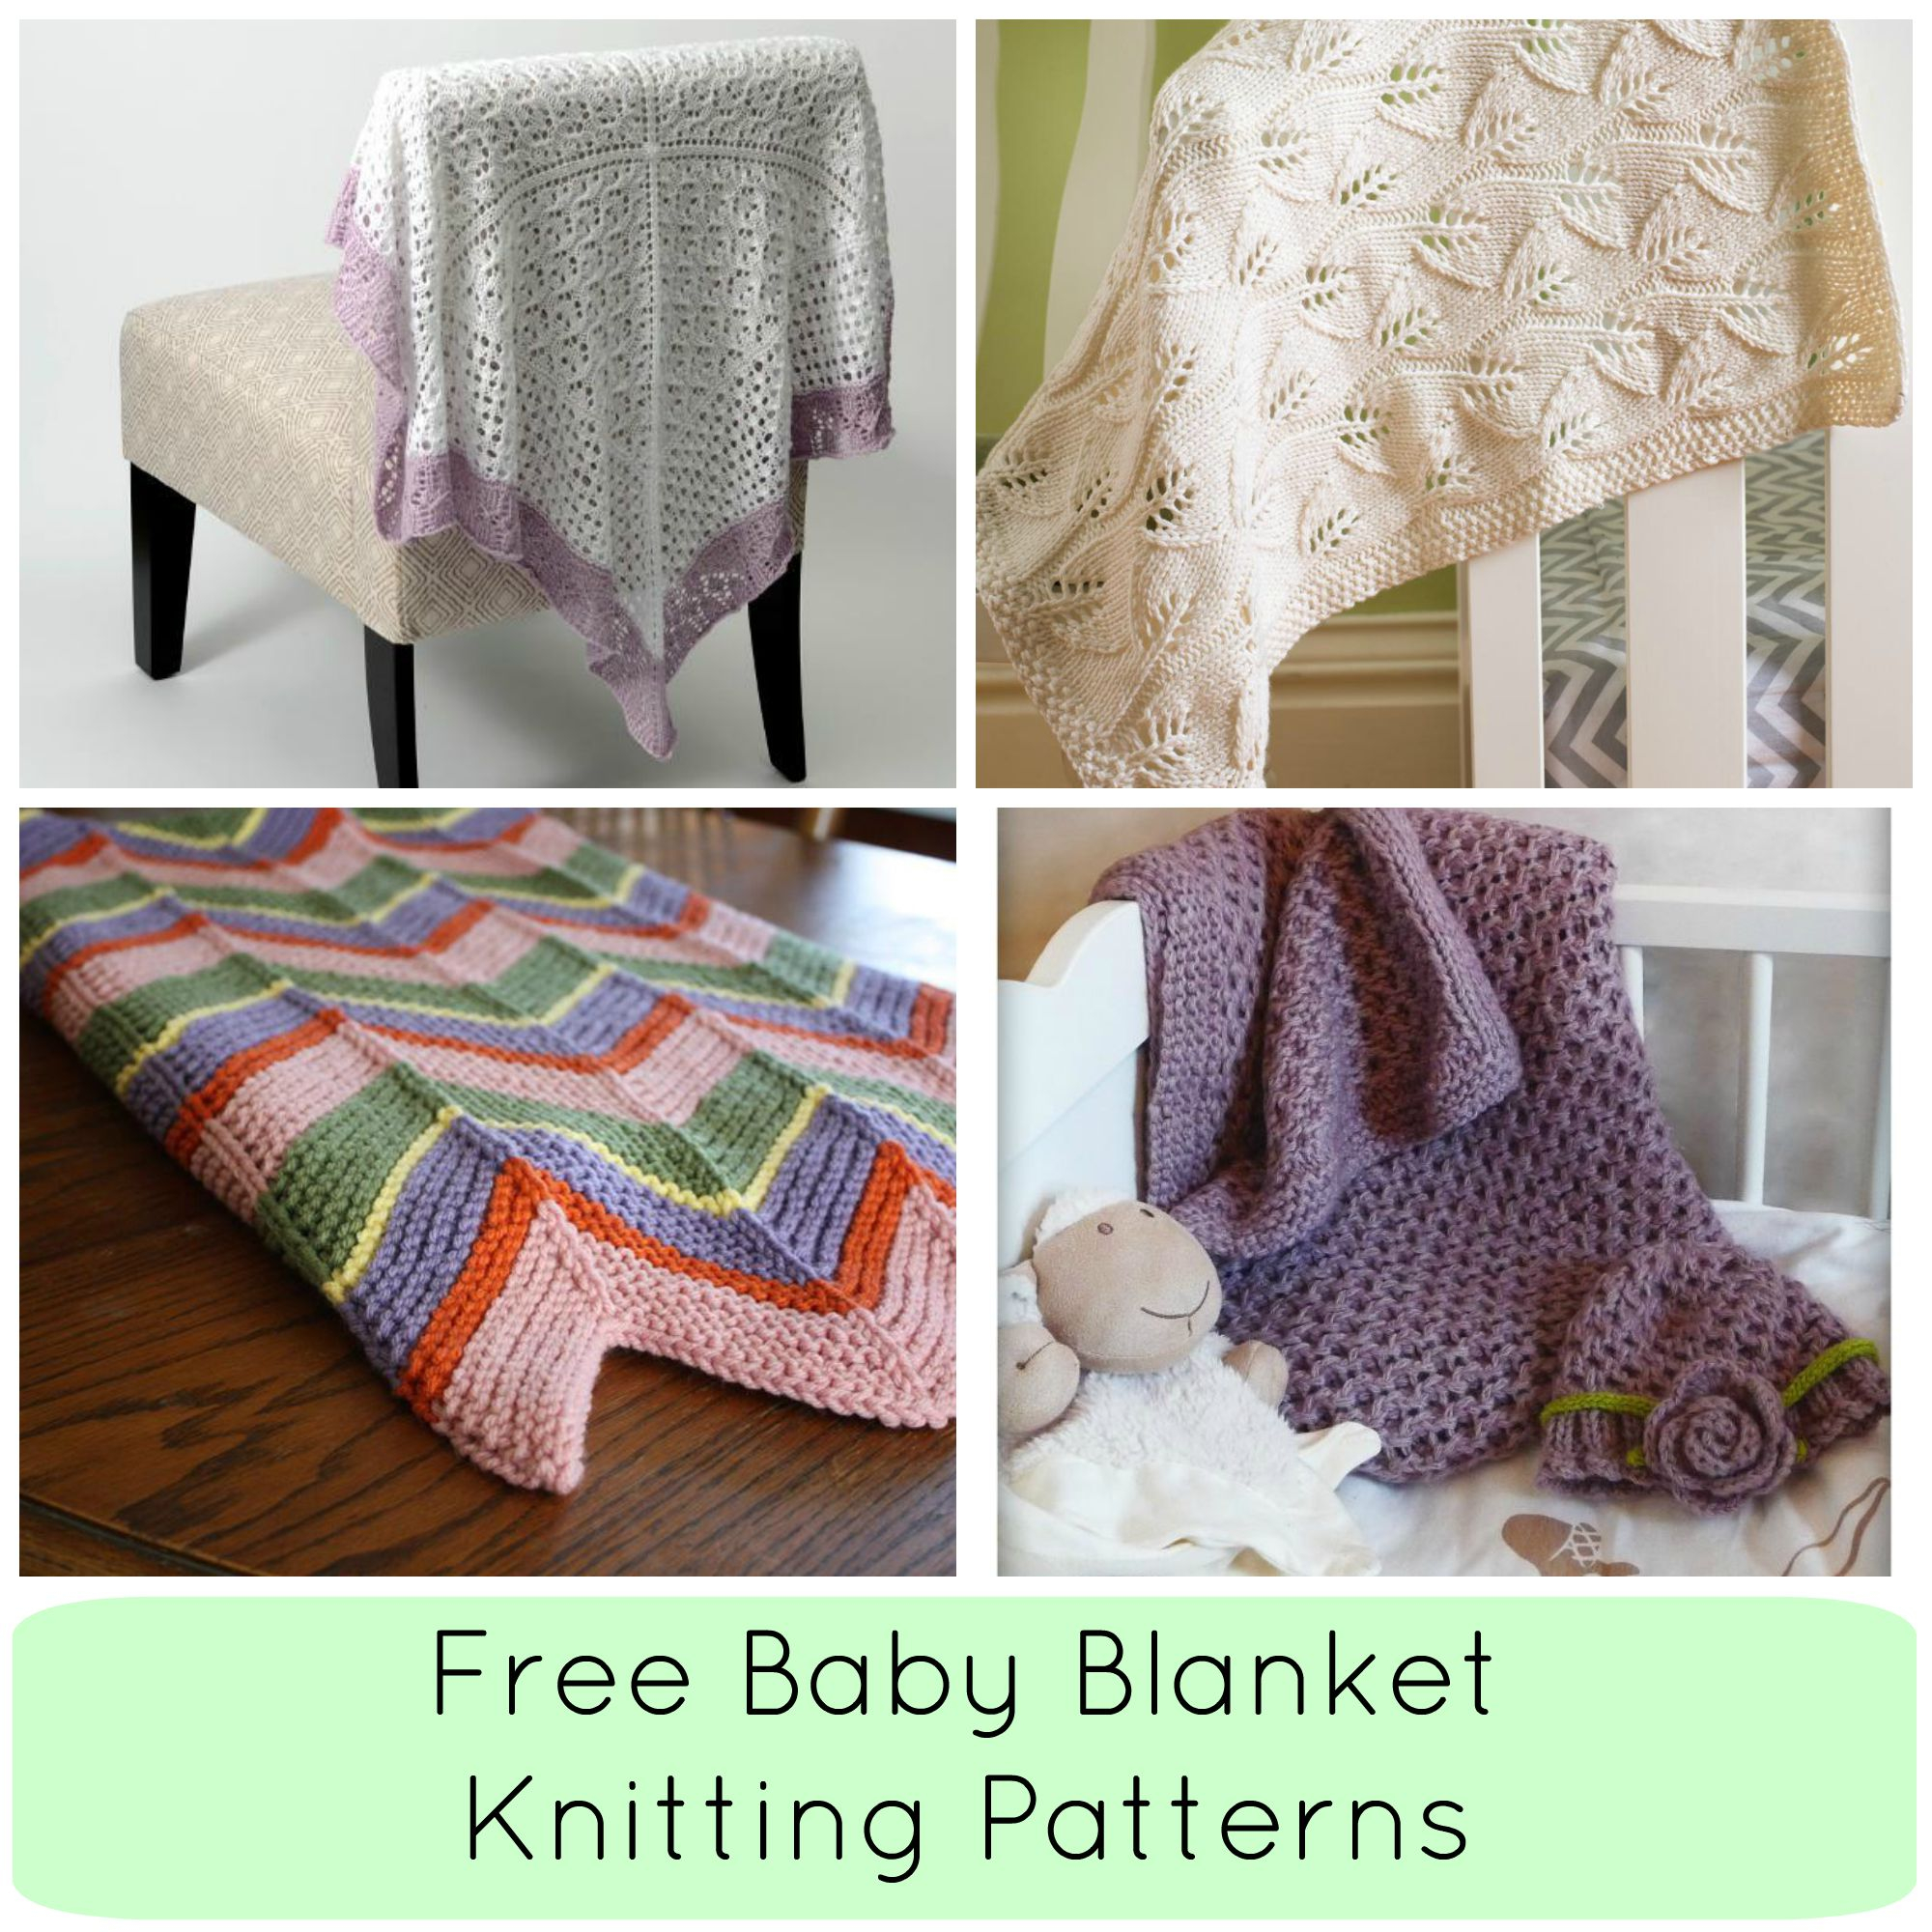 Free Easy Baby Blanket Knitting Patterns For Beginners 8 Free Ba Blanket Knitting Patterns Craftsy